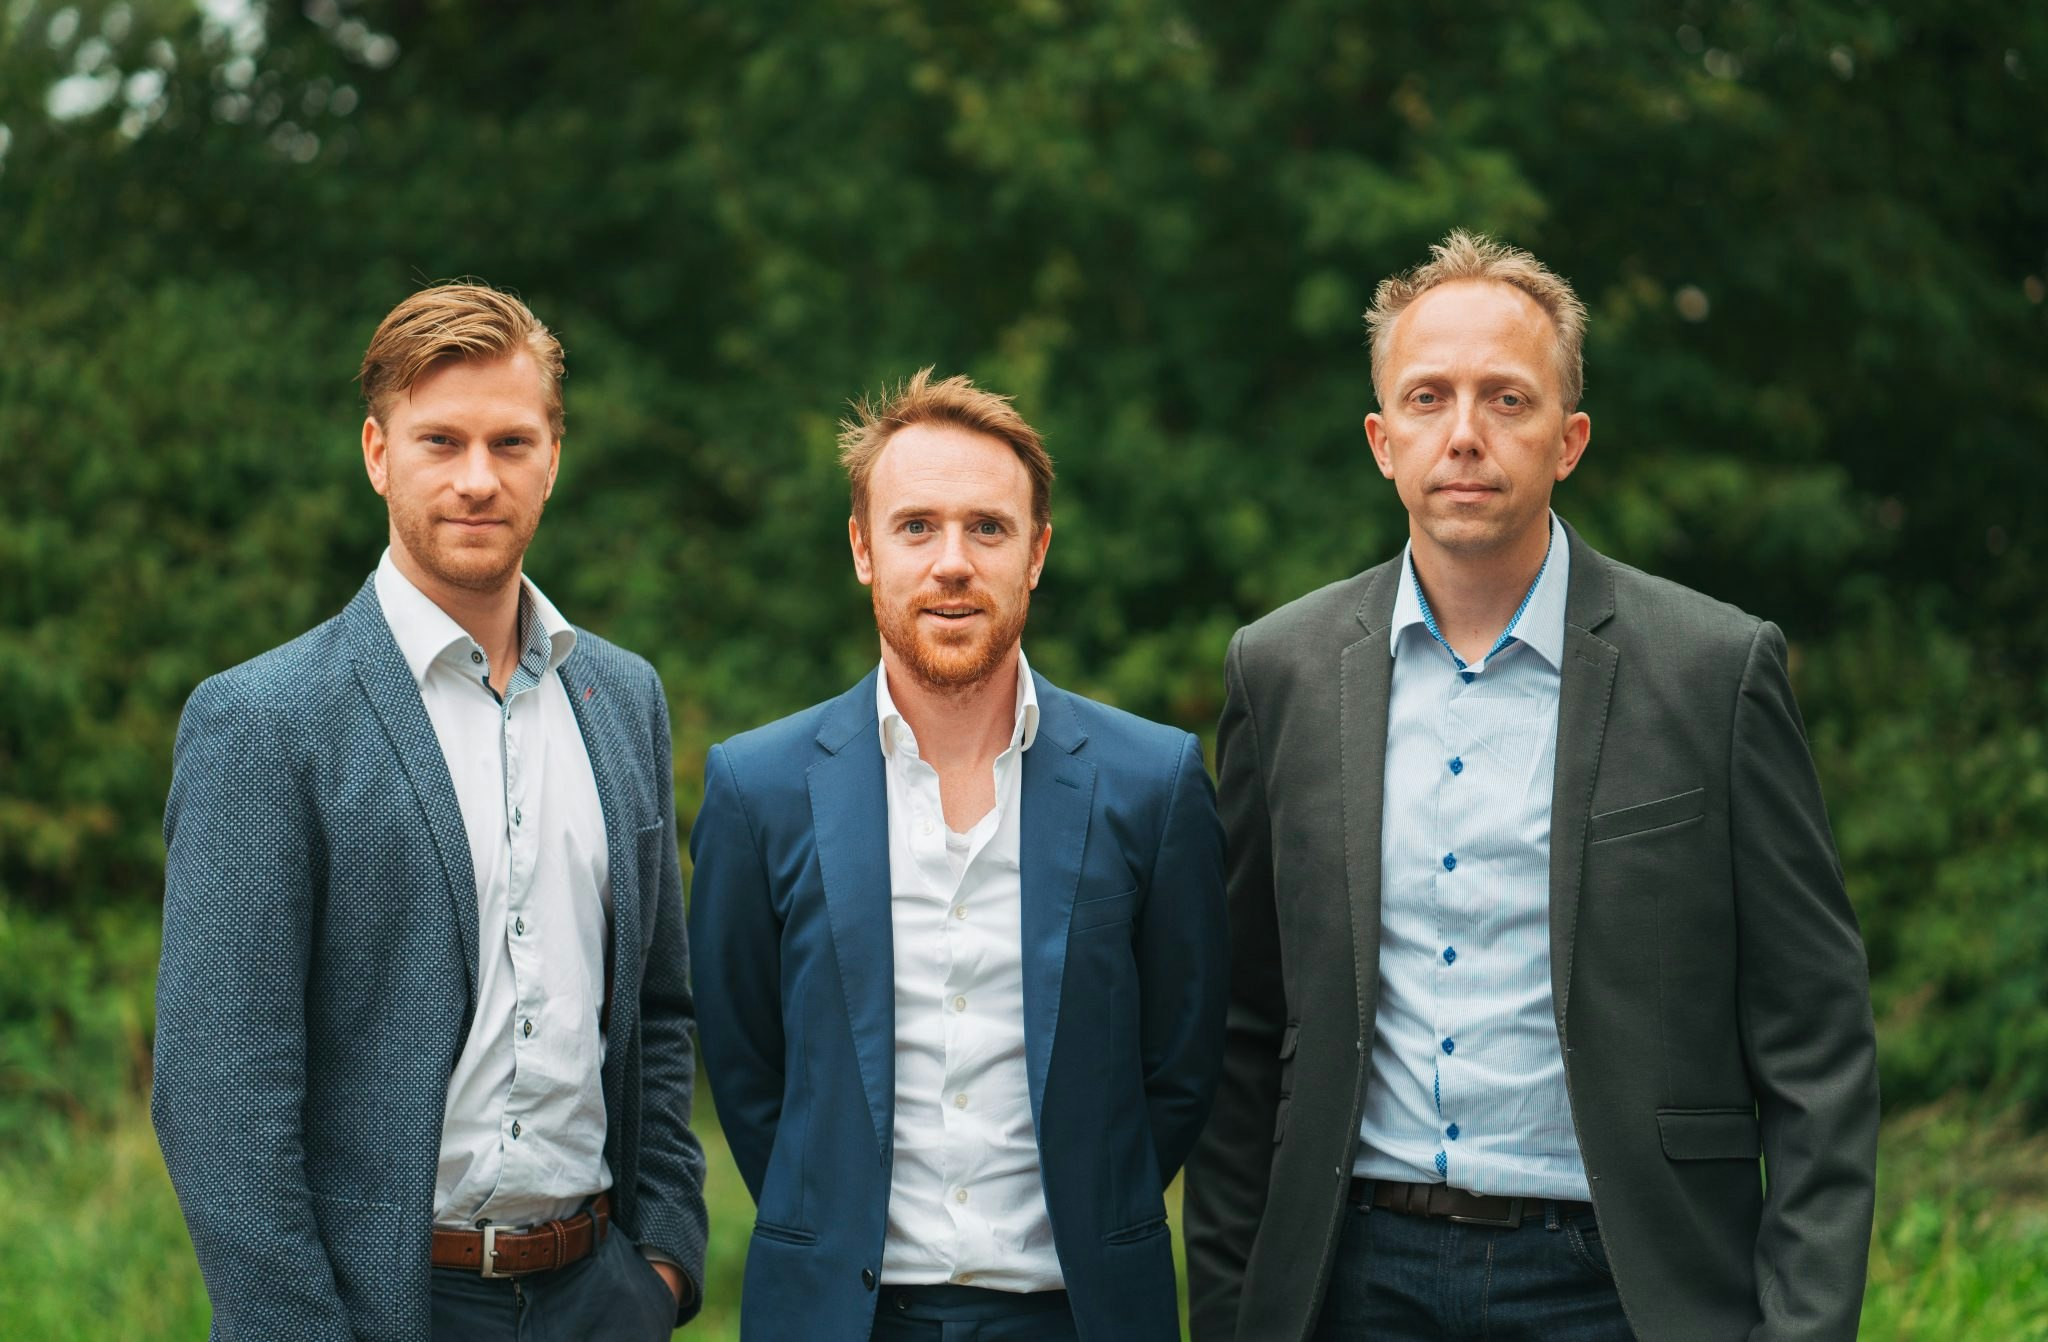 Meatable CTO Daan Luining (left), CEO Krijn De Nood (centre) and Head of R&amp;D Ruud Out (right). Credit: Meatable.